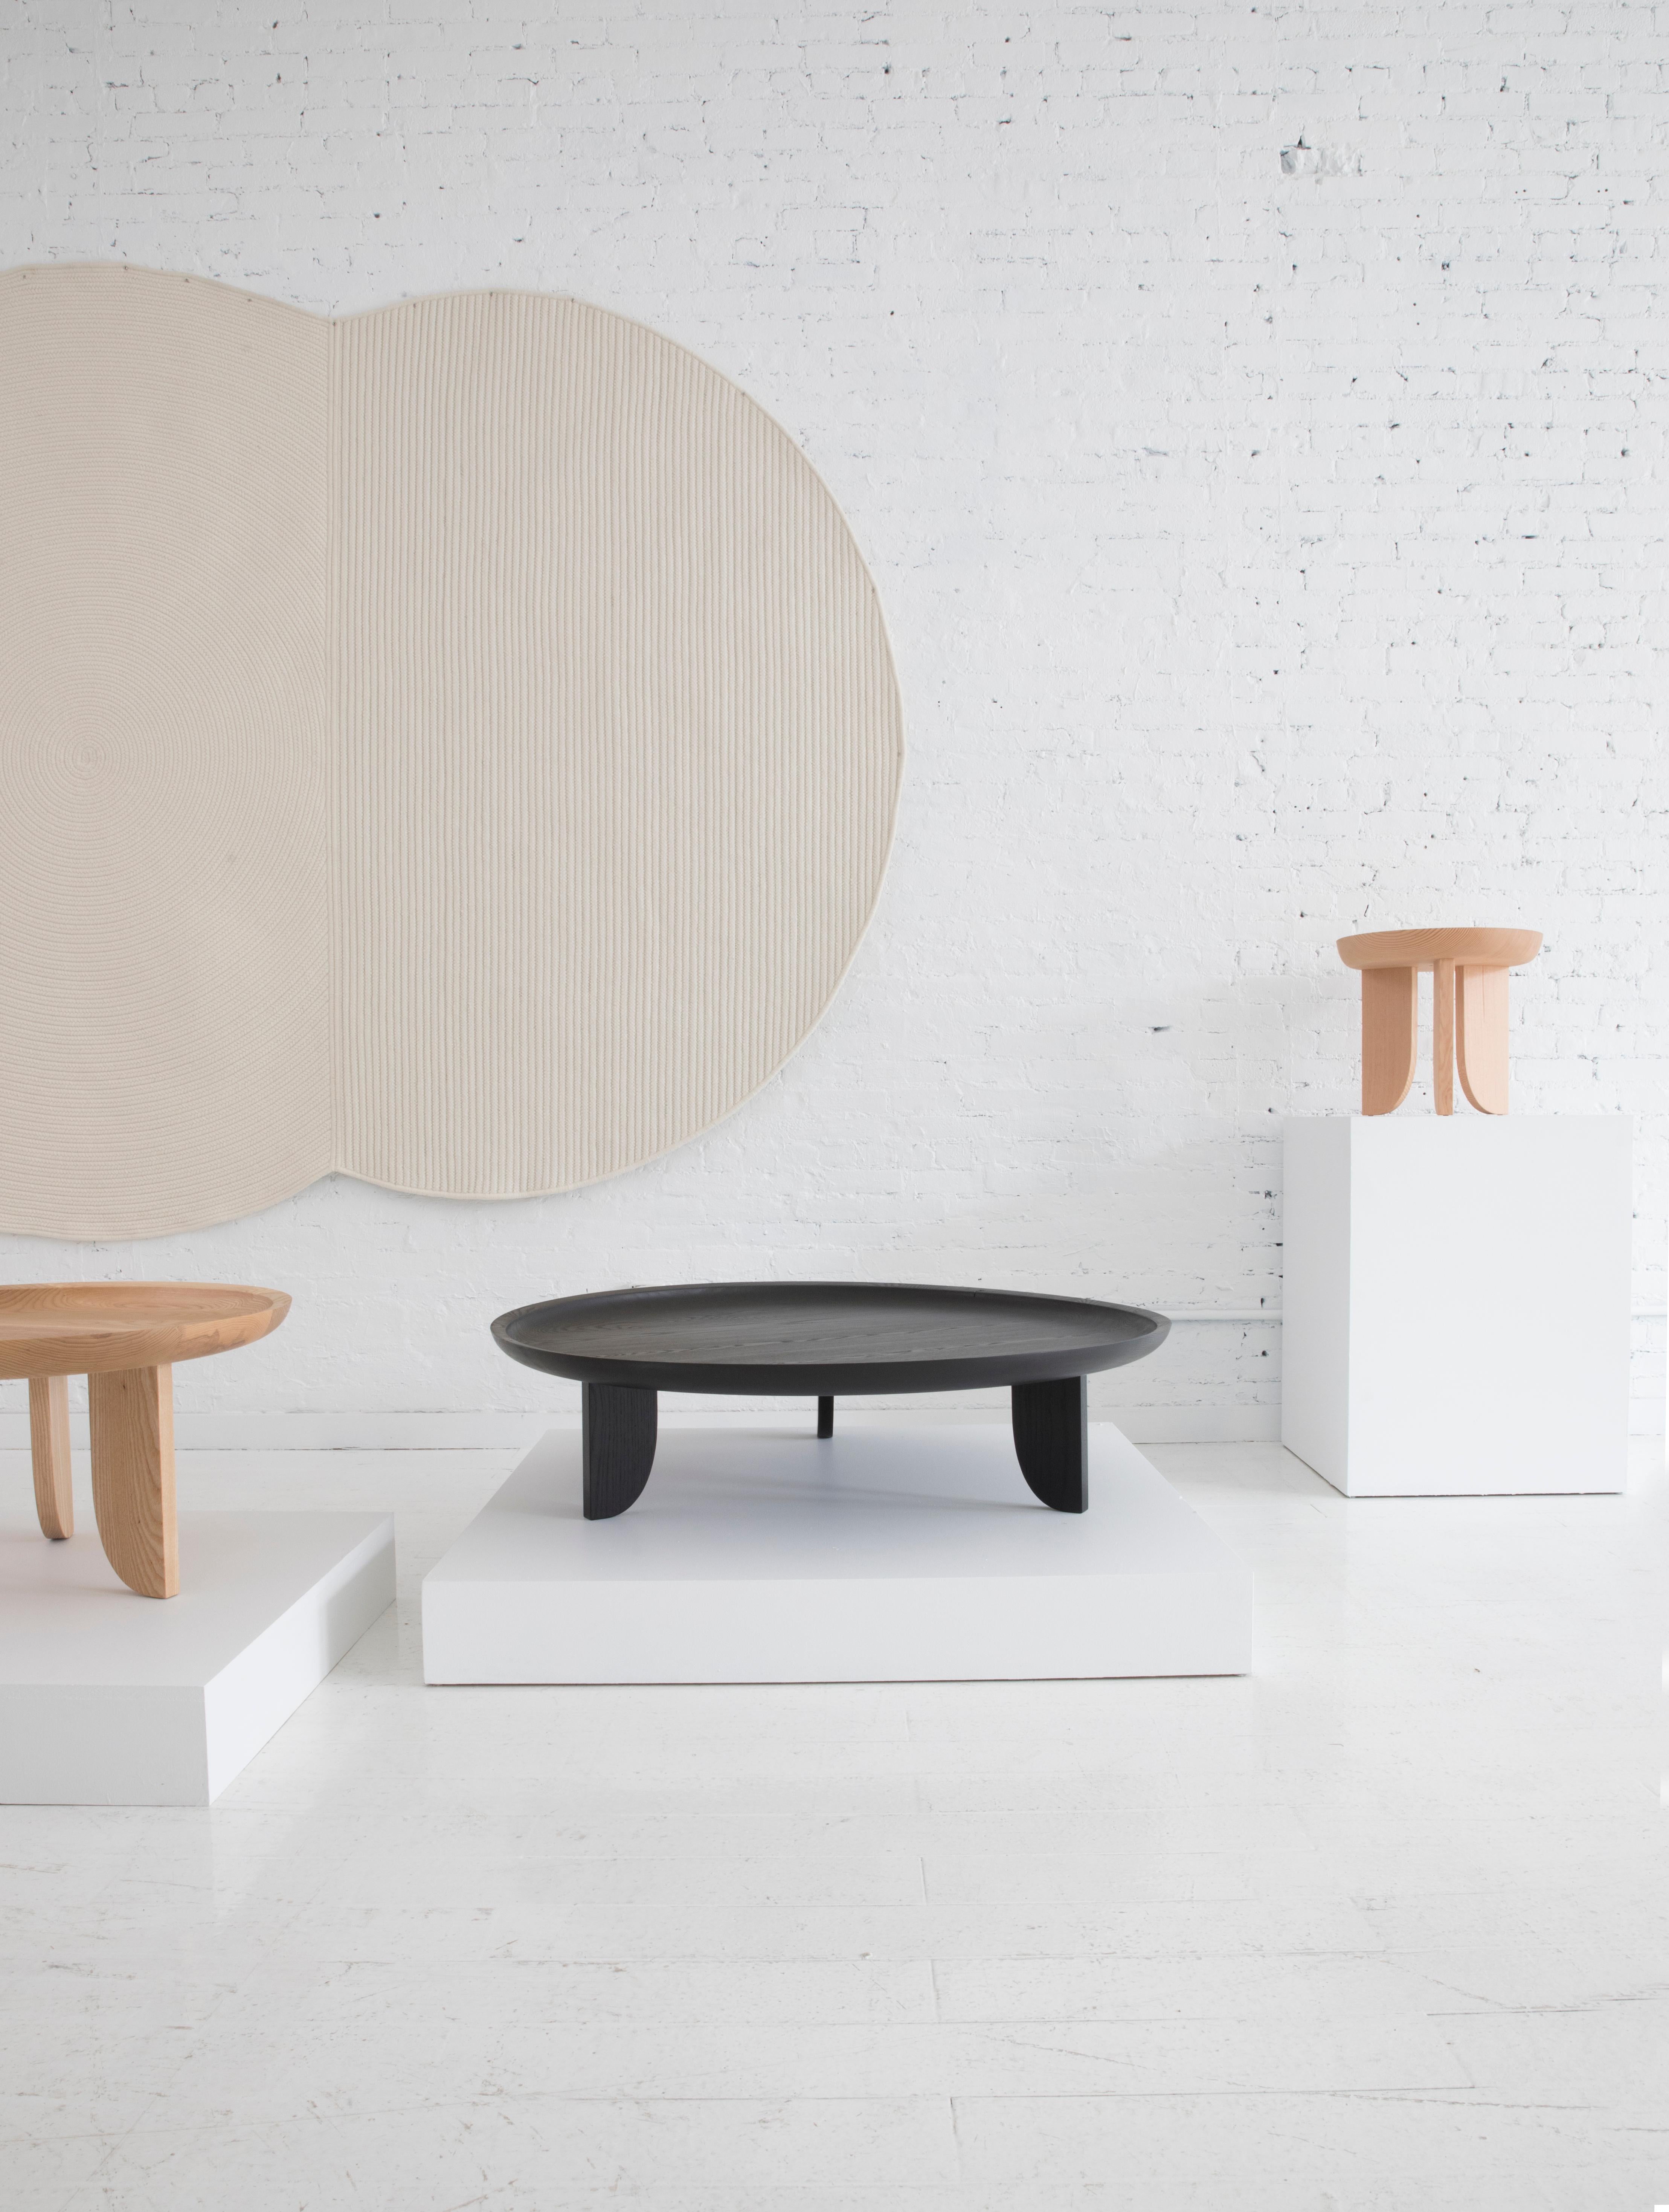 Taking inspiration from hand carved African stools, a scooped out tabletop is created with a little help from technology. A CNC router is used to cut away the wood bowl leaving behind a slope that quickly levels to a flat surface.

Built in the